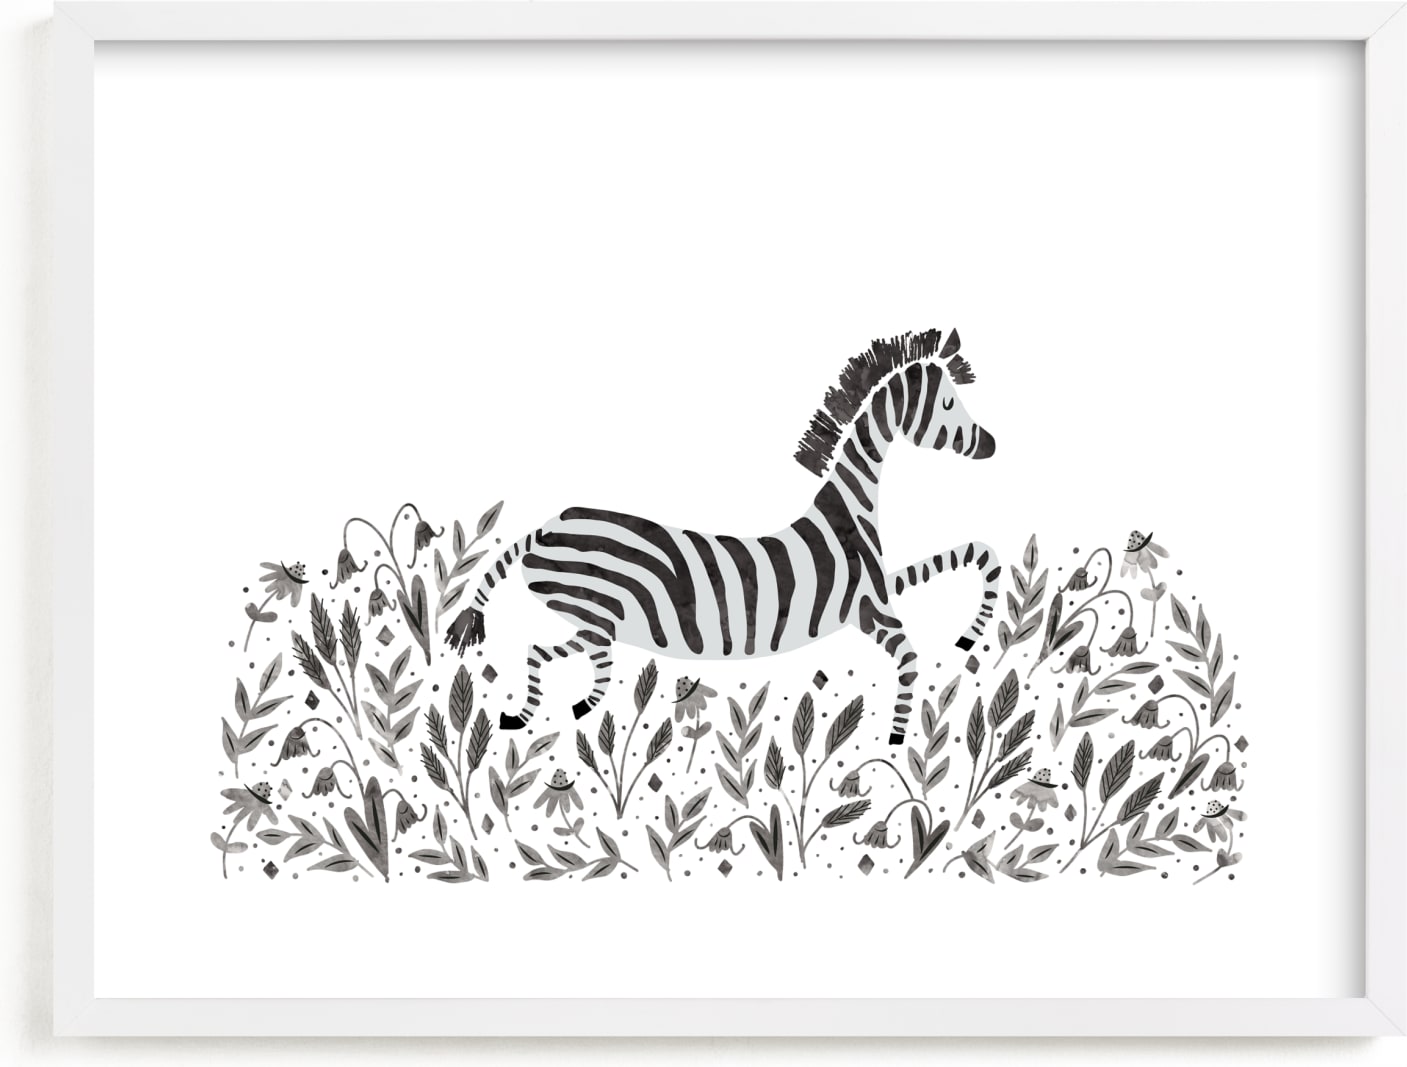 This is a black and white kids wall art by Jackie Crawford called Zebra in the Flowers.